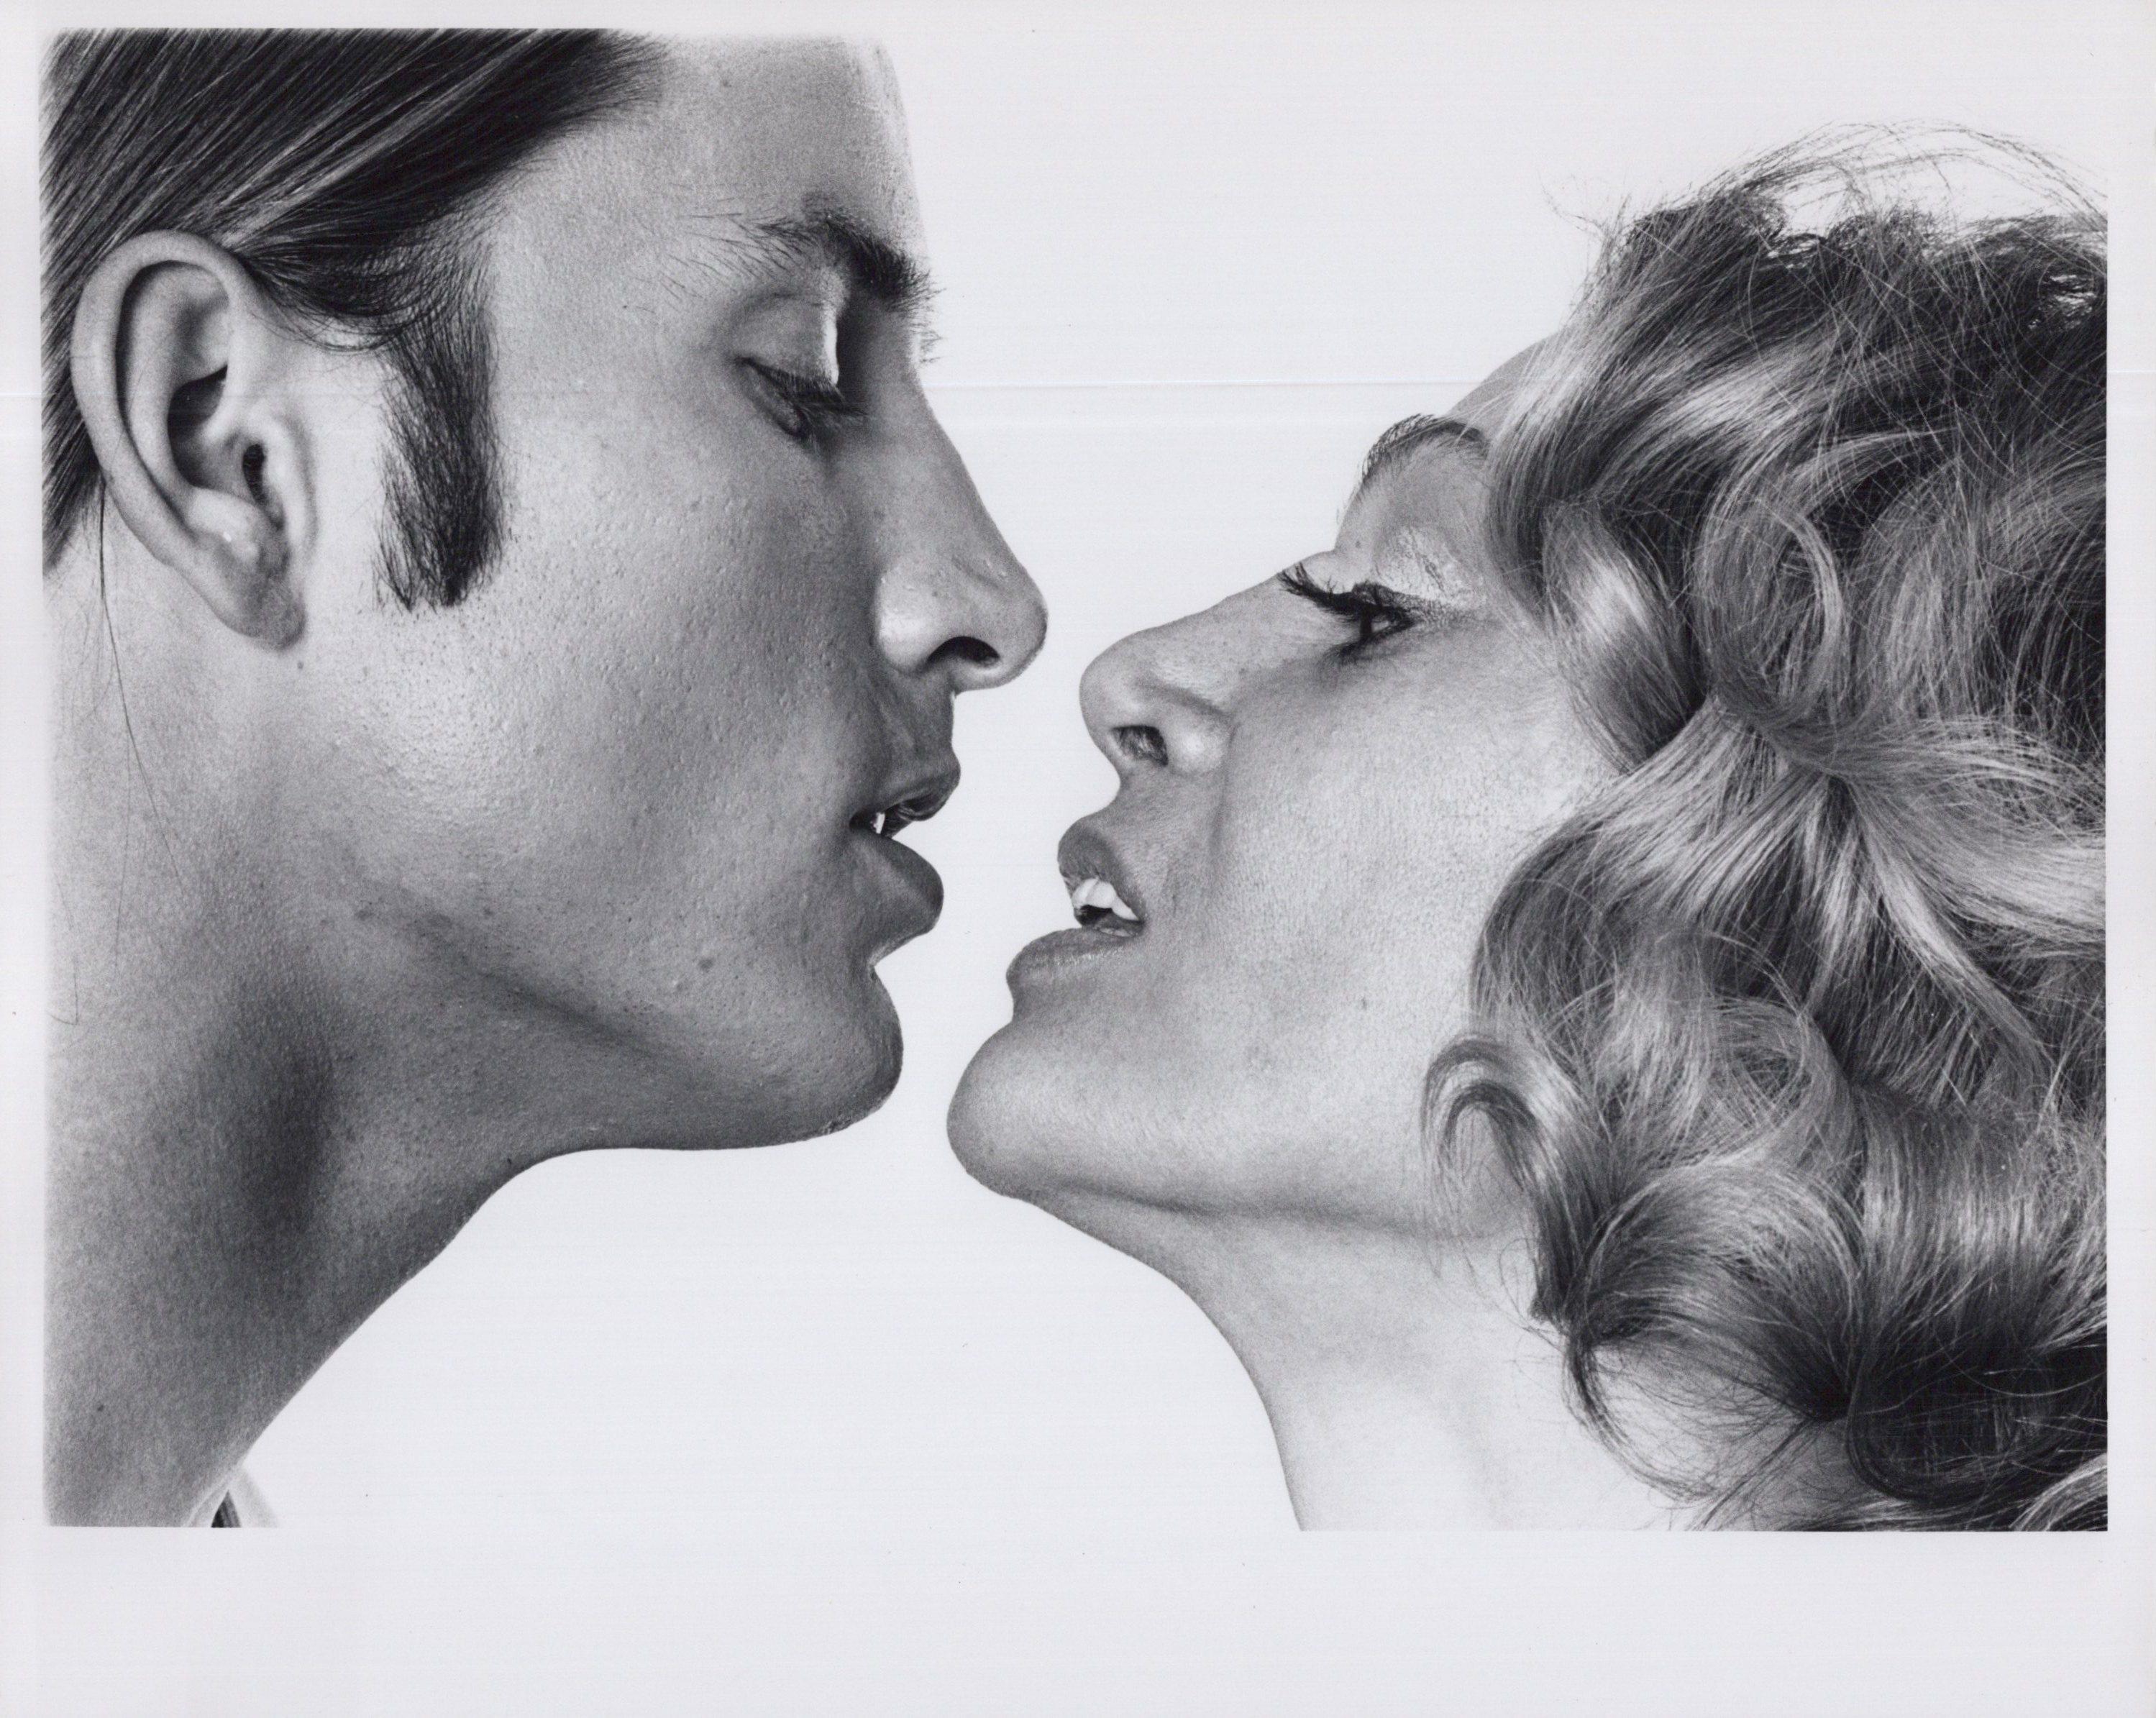 Jack Mitchell Black and White Photograph - Andy Warhol superstars Joe Dallesandro and Sylvia Miles in 'Heat'